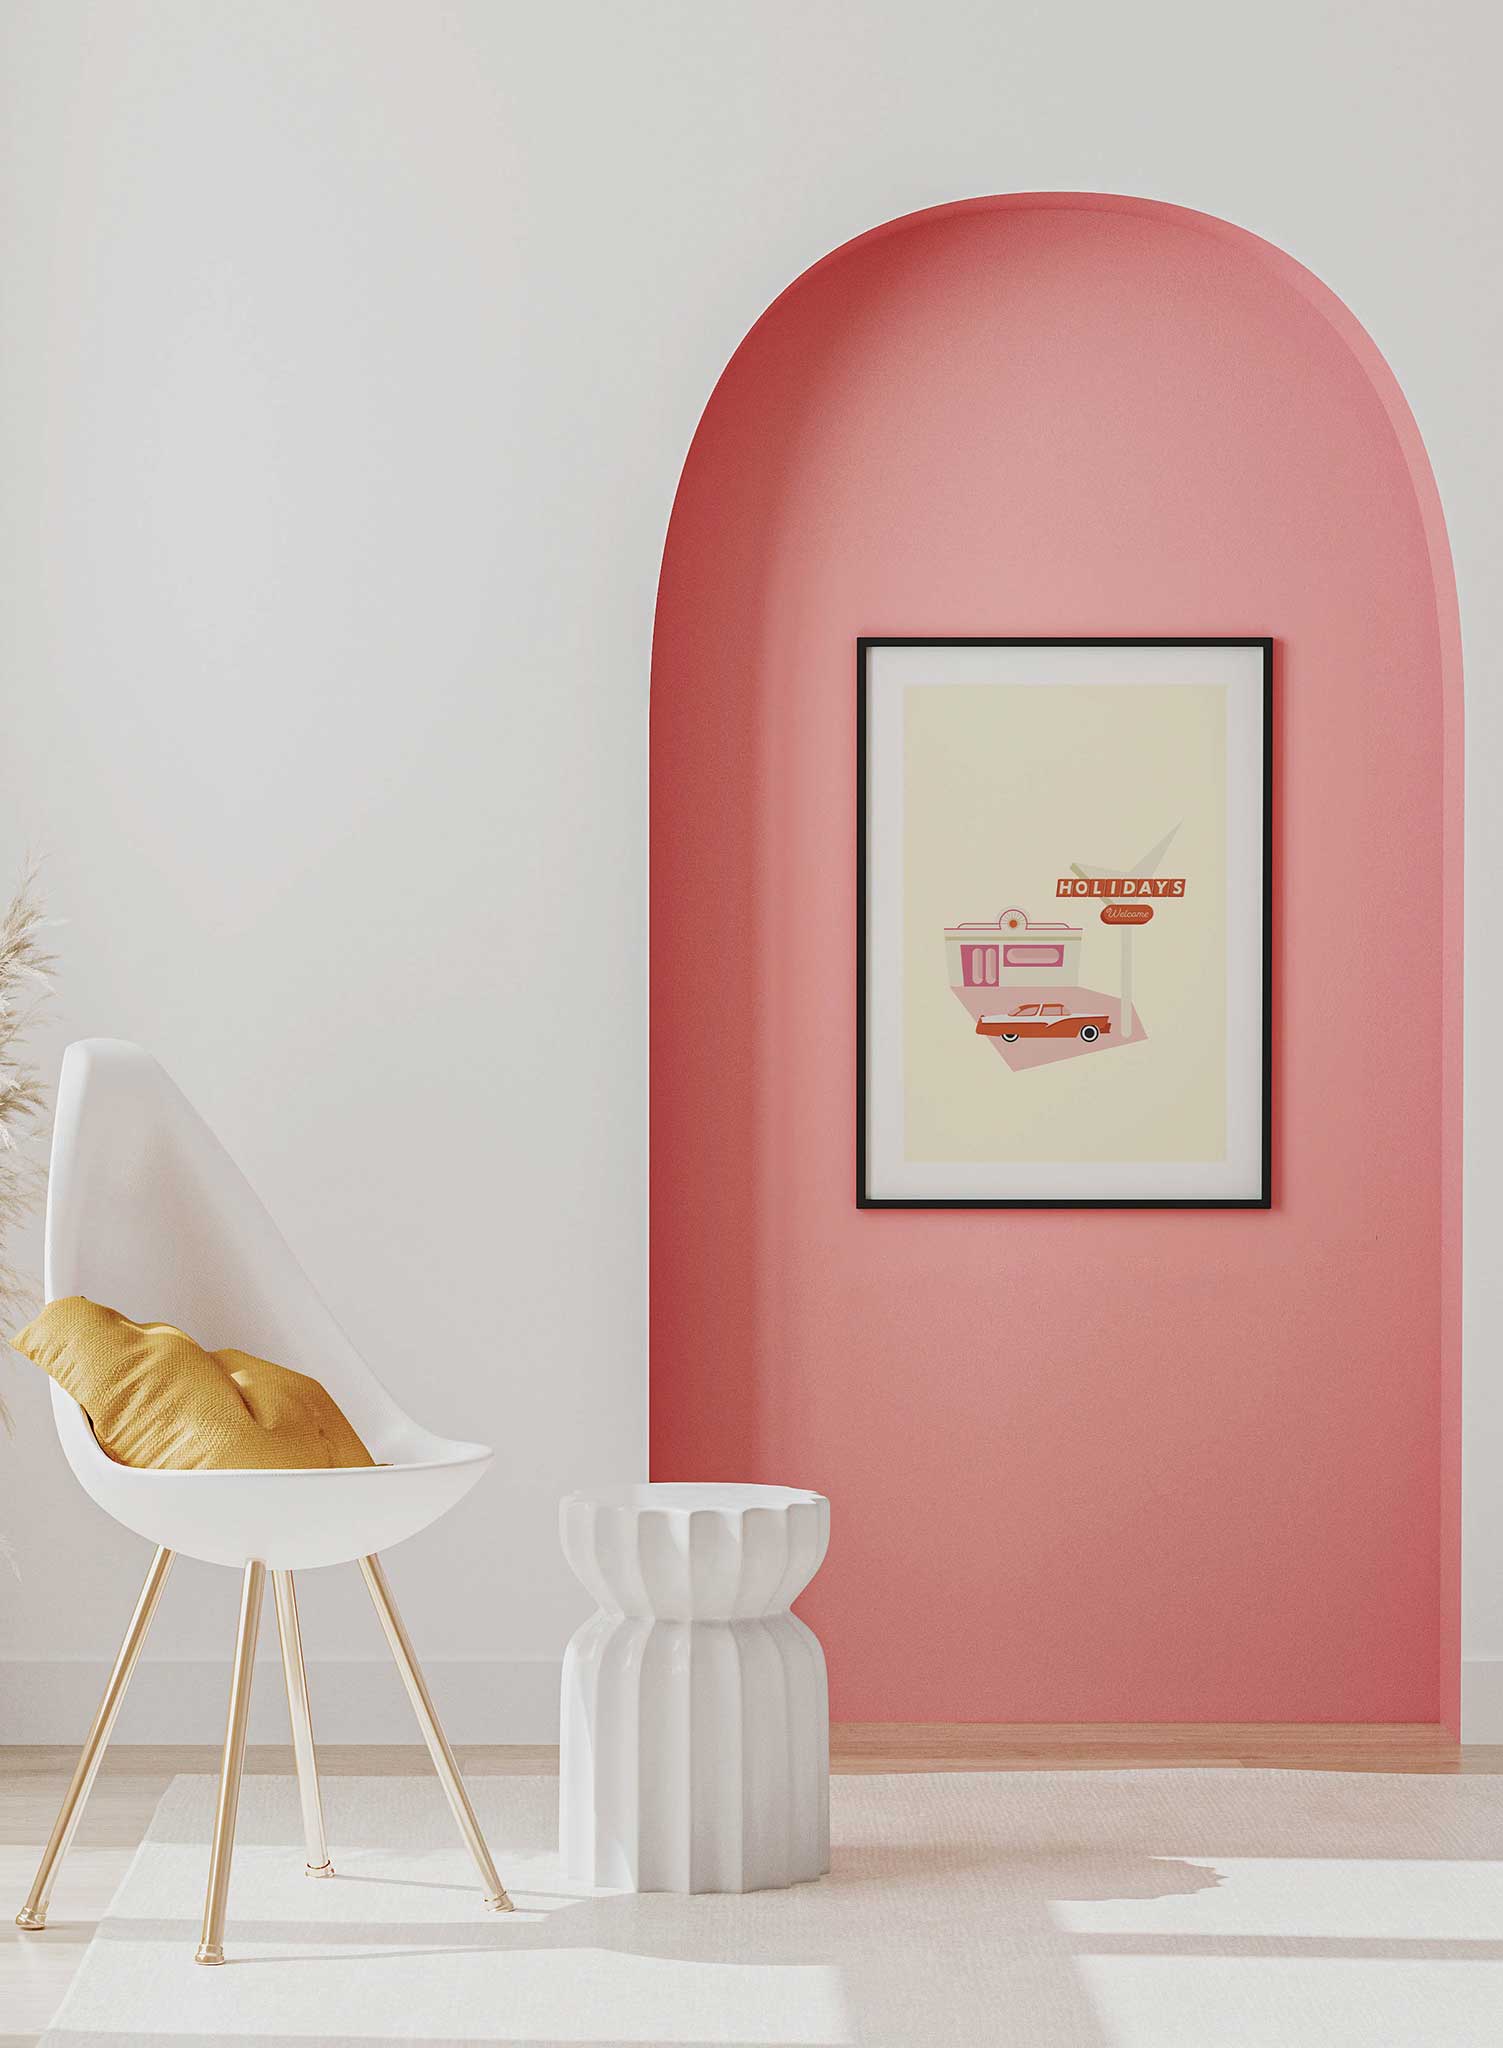 Retro Holiday is a minimalist illustration poster of a '50s car by Opposite Wall.